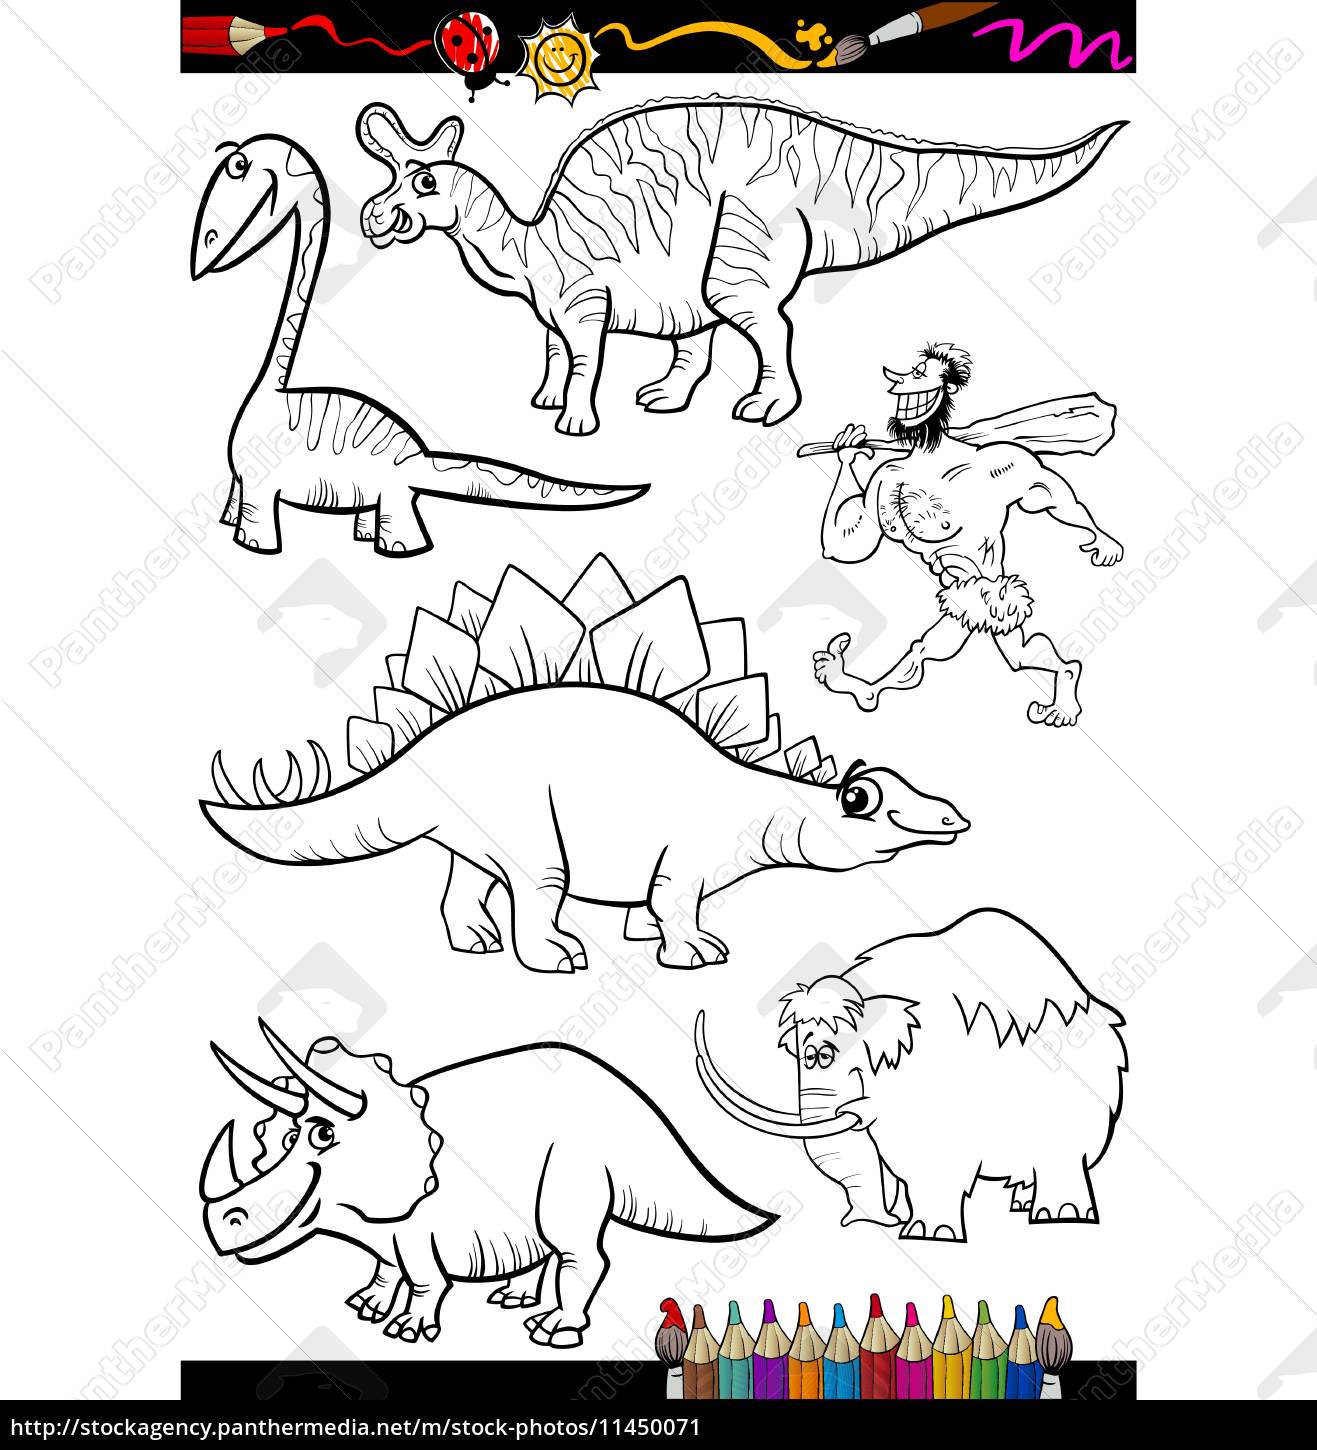 prehistoric set for coloring book - Stock Photo - #11450071